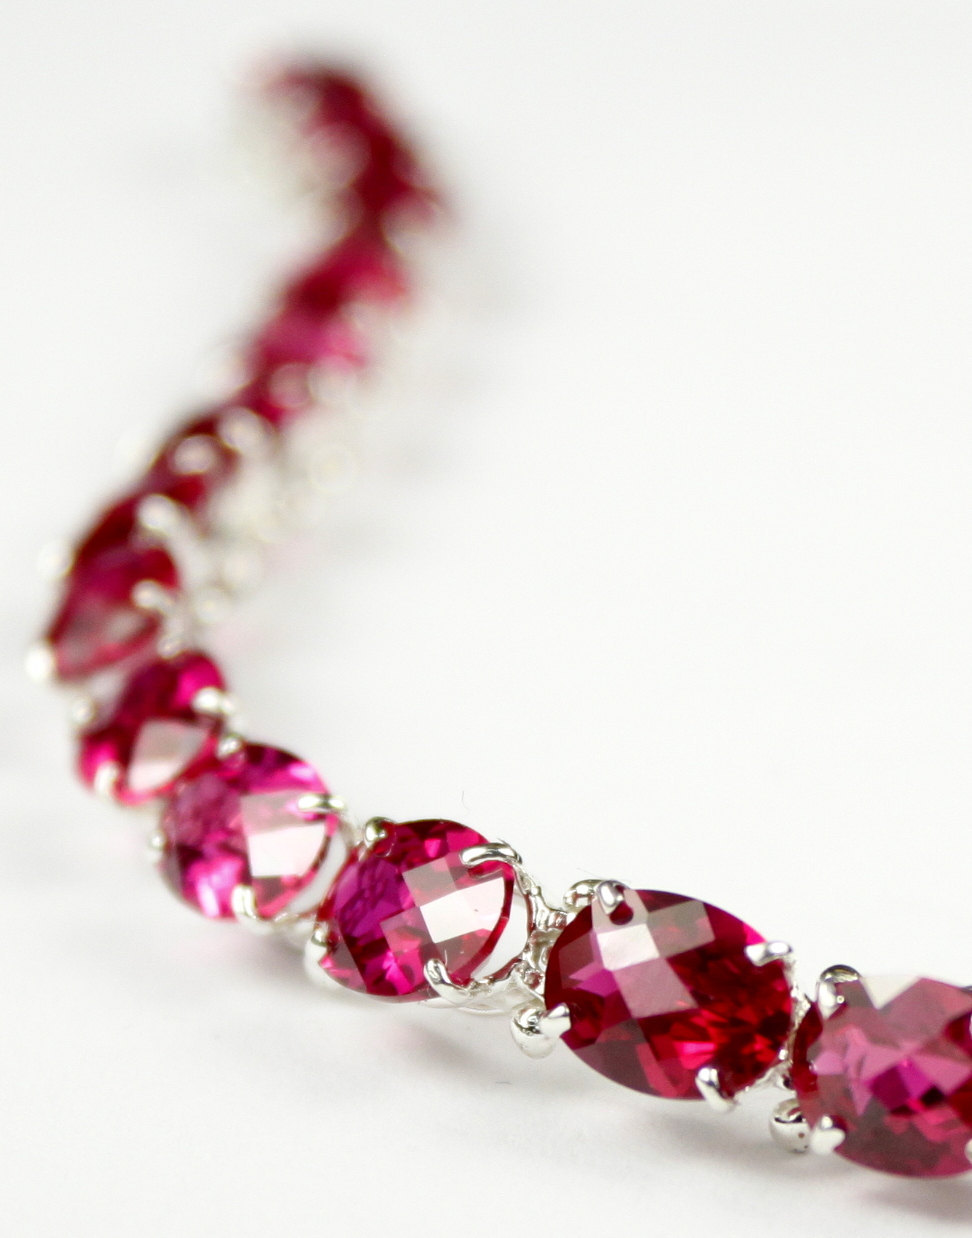 SB002, 8x6mm 30 cts, Created Ruby, 925 Sterling Silver Bracelet - $325.28